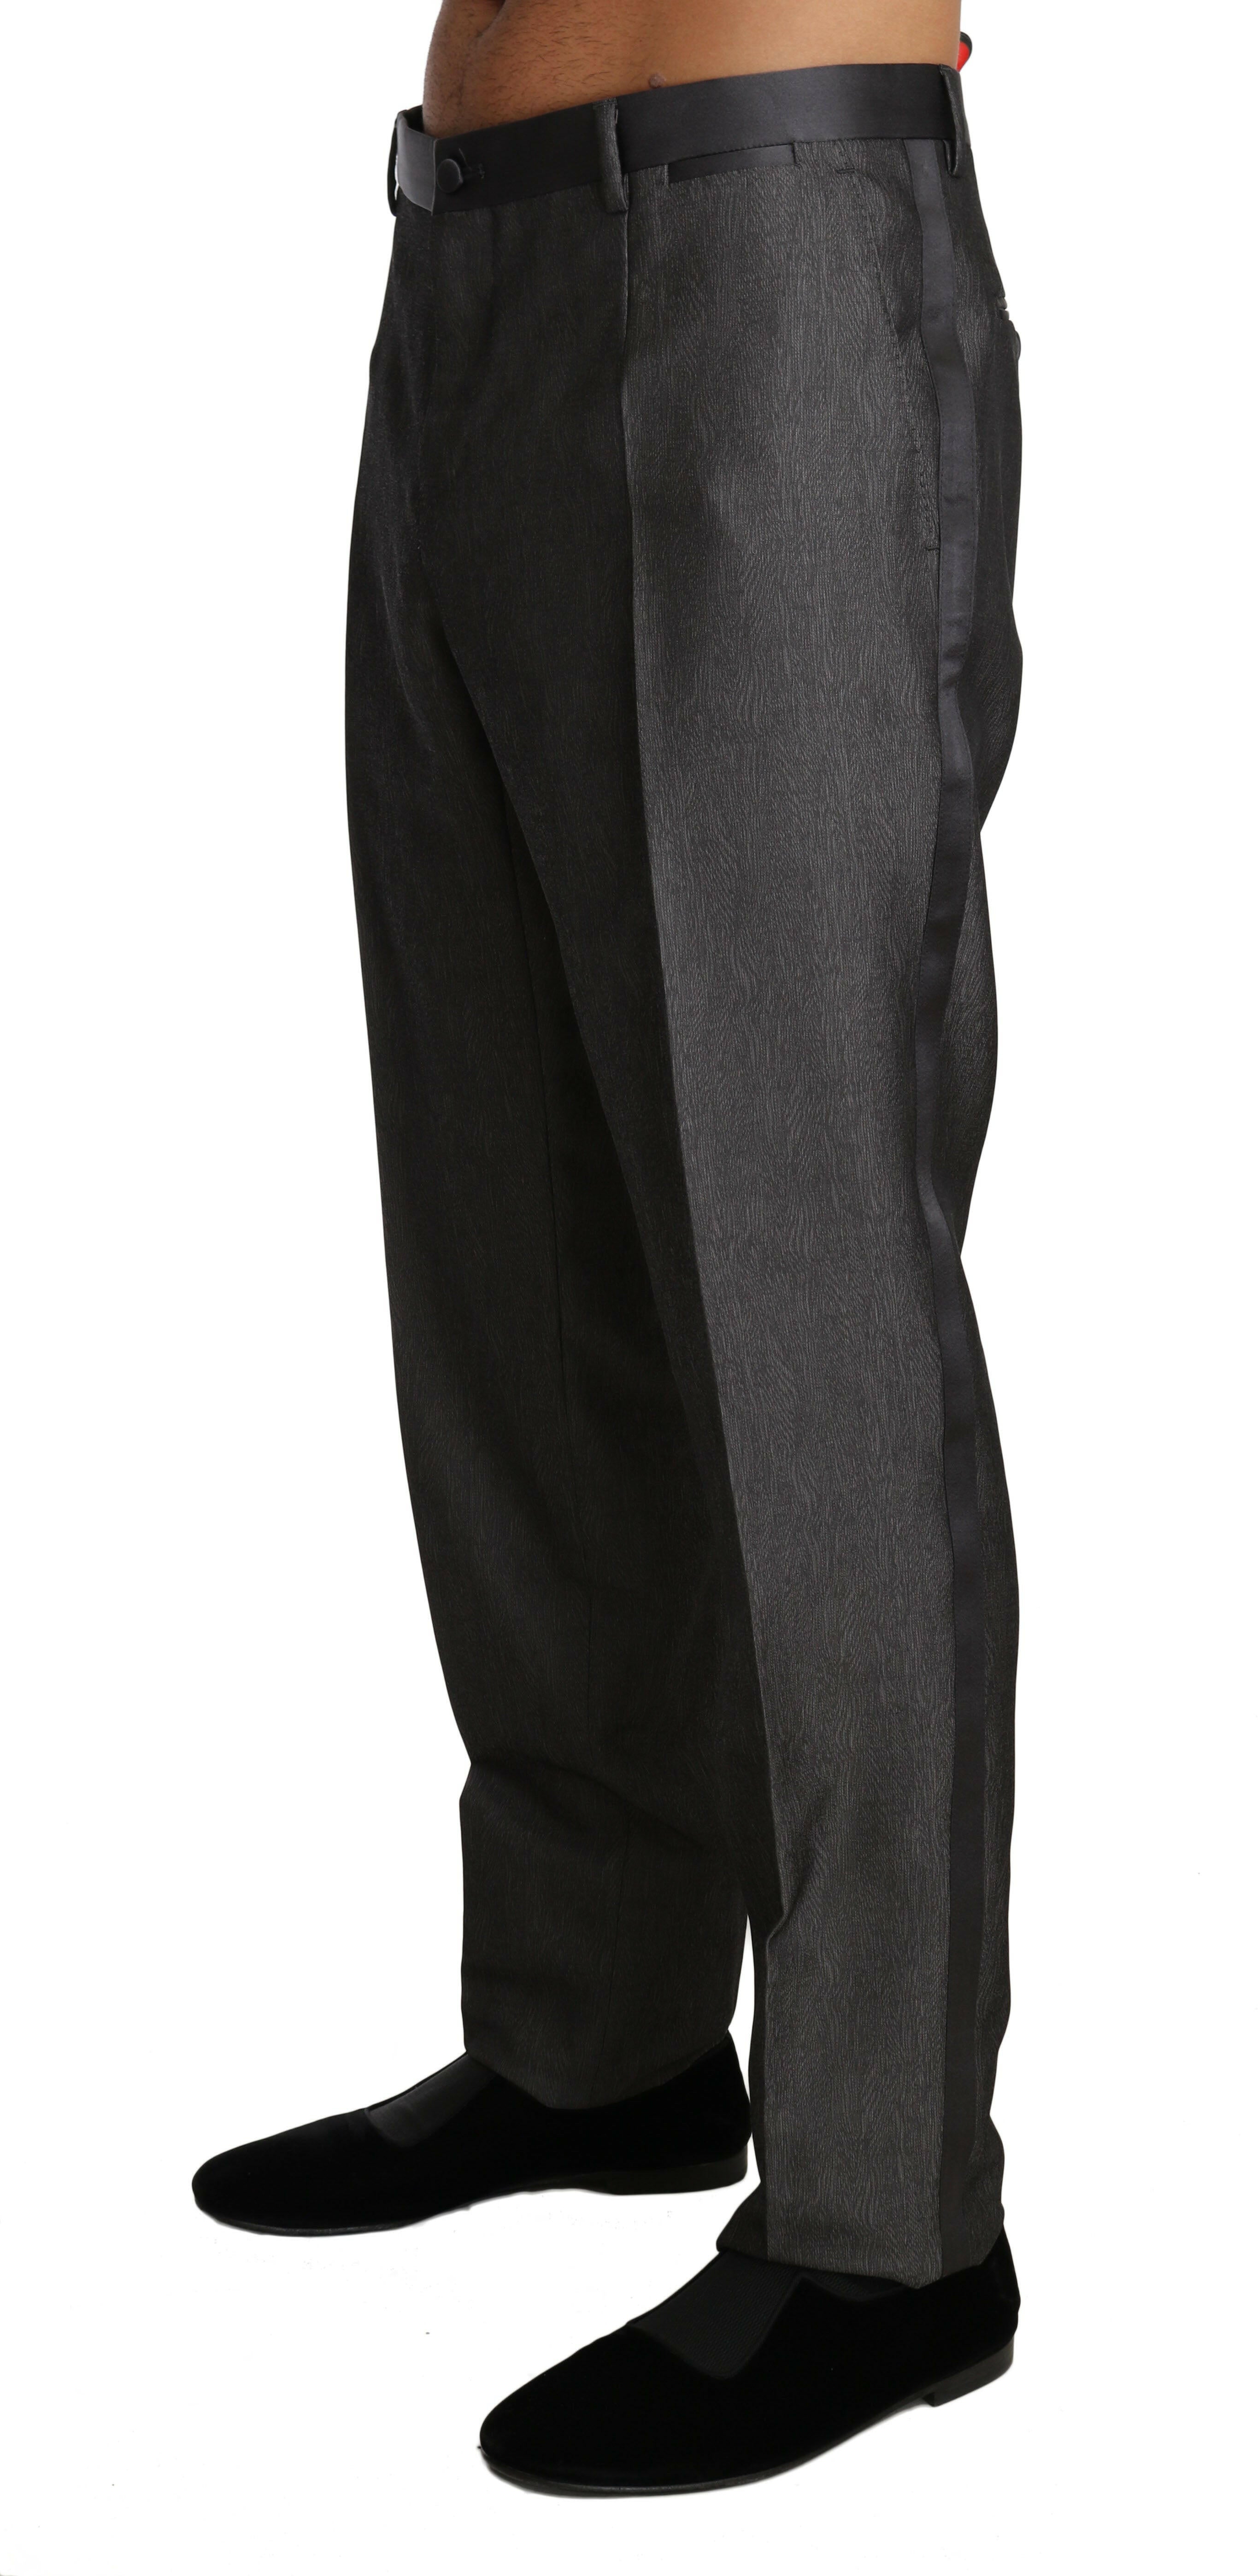 Dolce & Gabbana Gray Wool Silk Patterned Formal Trousers - GENUINE AUTHENTIC BRAND LLC